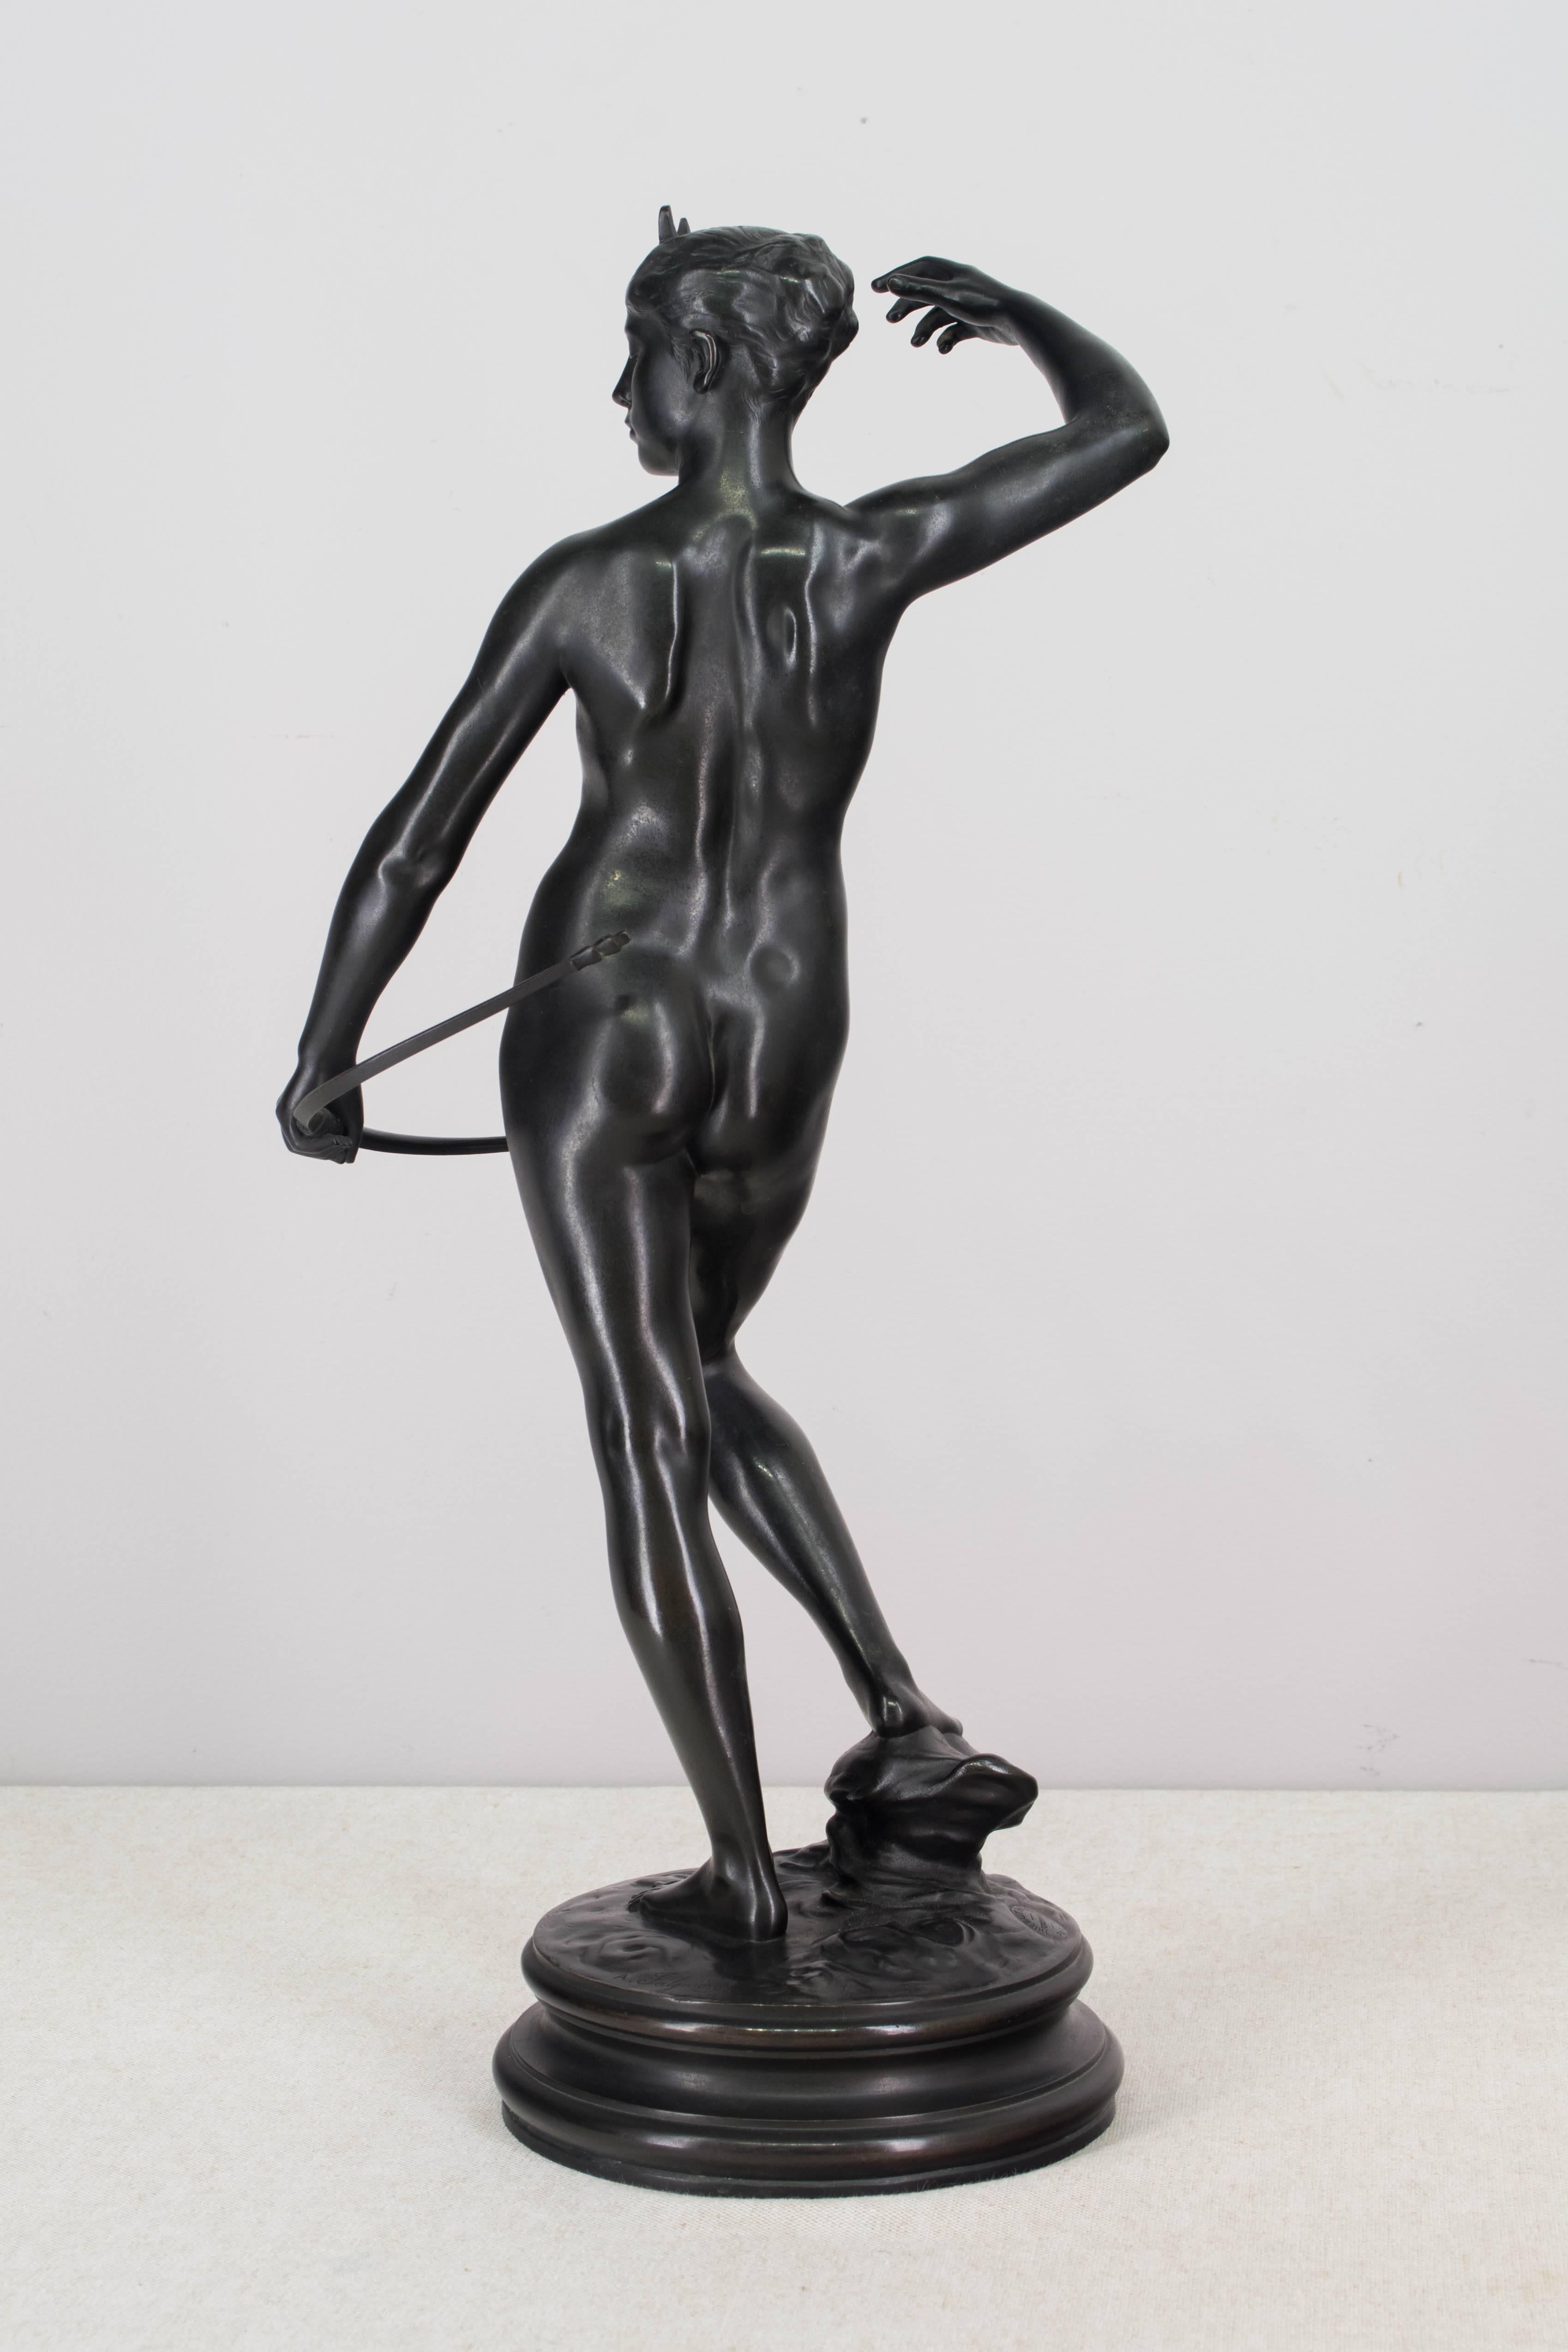 19th century French bronze sculpture of Diana the Huntress by Jean Alexandre Falguiere (1831-1900). Cast in Paris by Thiebaut Freres Fondeurs. Fine quality with even dark patina. Foundry mark and artist's signature on base, circa 1880-1900.